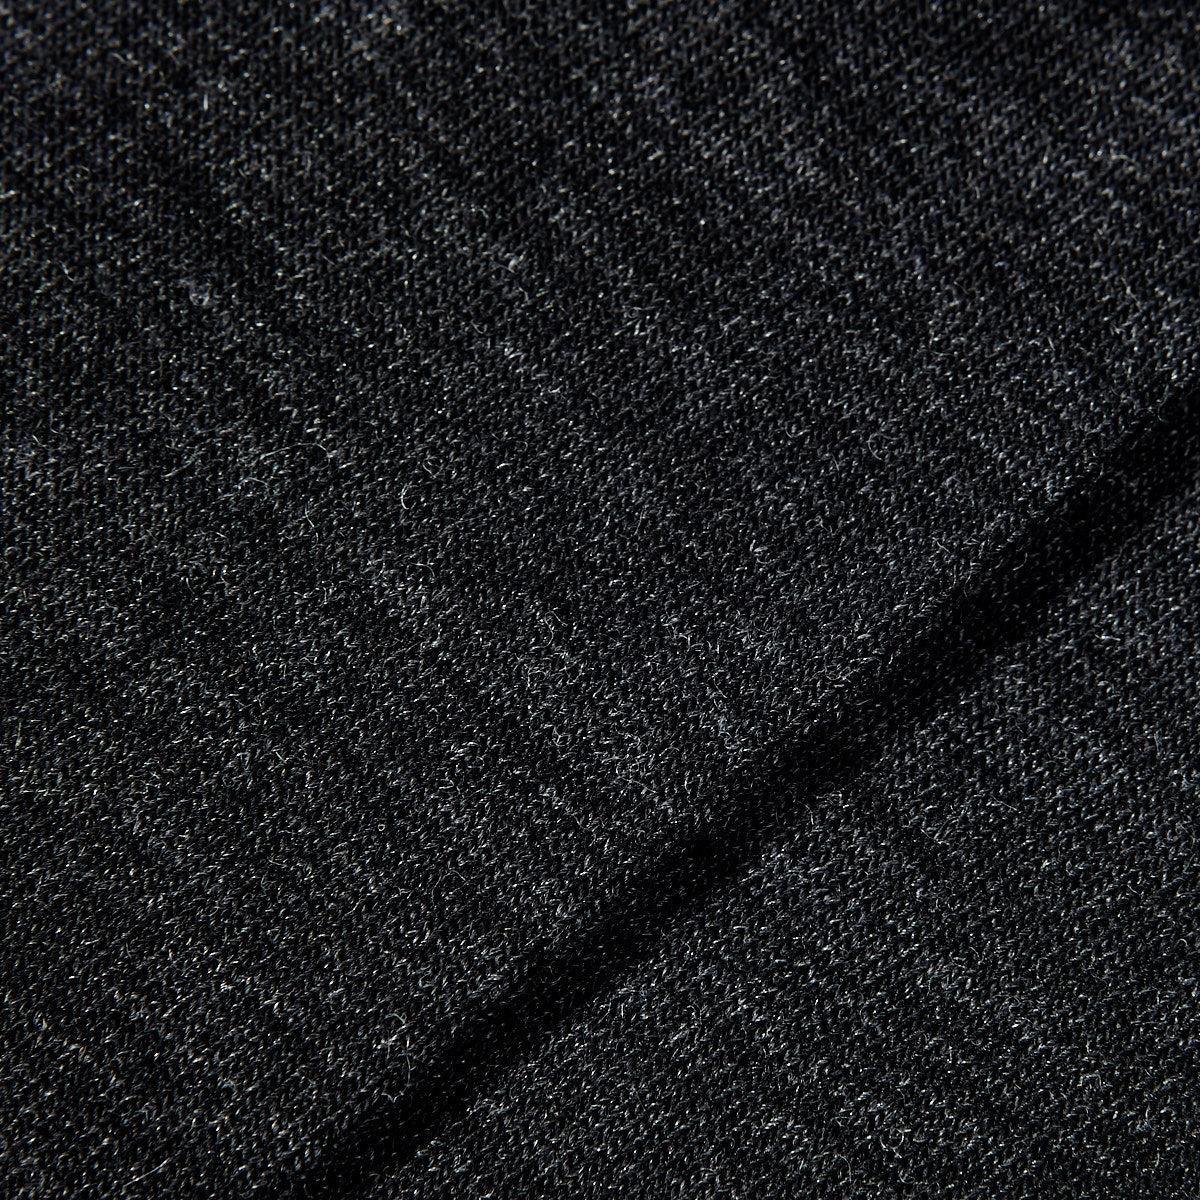 A close up image of Falke Grey Airport Wool Cotton socks made from merino wool.